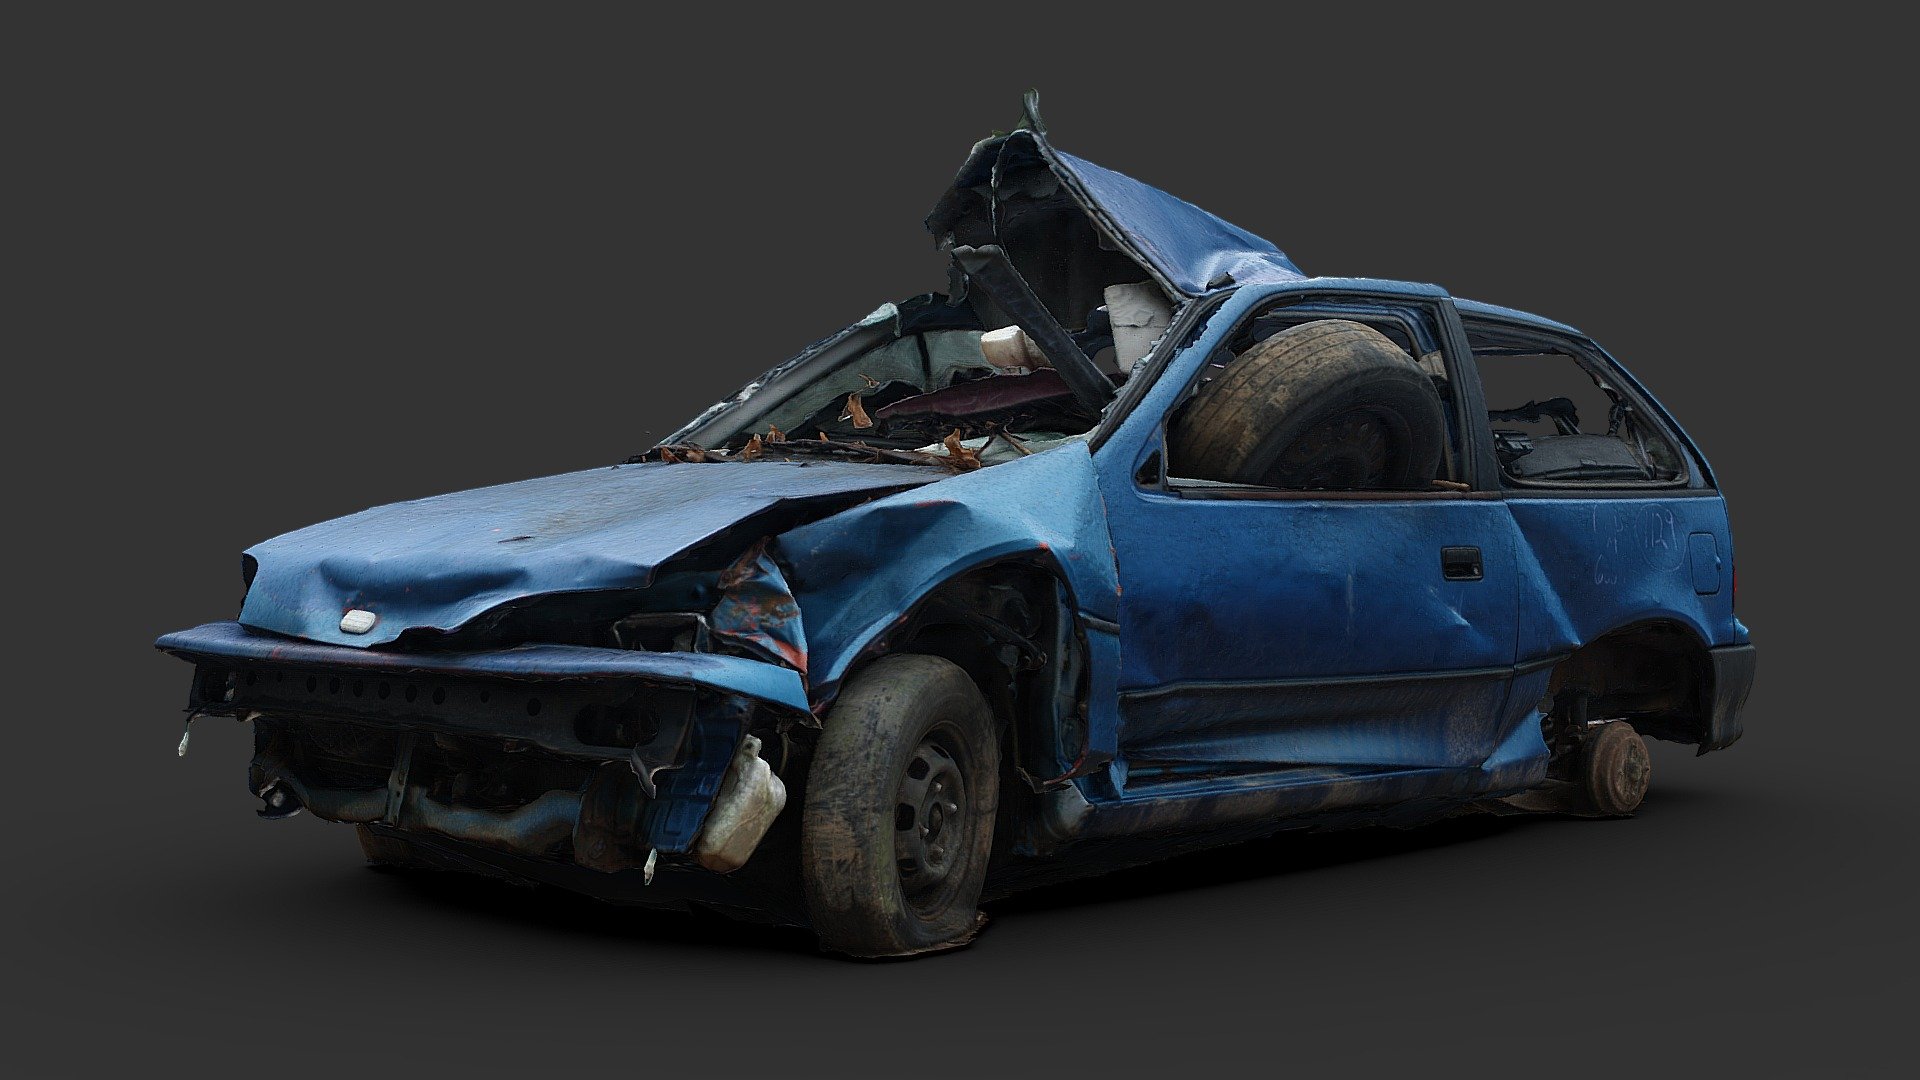 Another destroyed car waiting to be crushed, I scanned these before I went on vacation for a week, but I didn't have time to post them before I left

Processed from 274 photos in reality capture, taken with my Canon EOS Rebel XSI

Gameready/lowpoly version available here: https://sketchfab.com/3d-models/compact-wreck-47dbb4821c0d4e60a724bc1080b6dd99 - Destroyed Car 07 (Raw Scan) - Download Free 3D model by Renafox (@kryik1023) 3d model